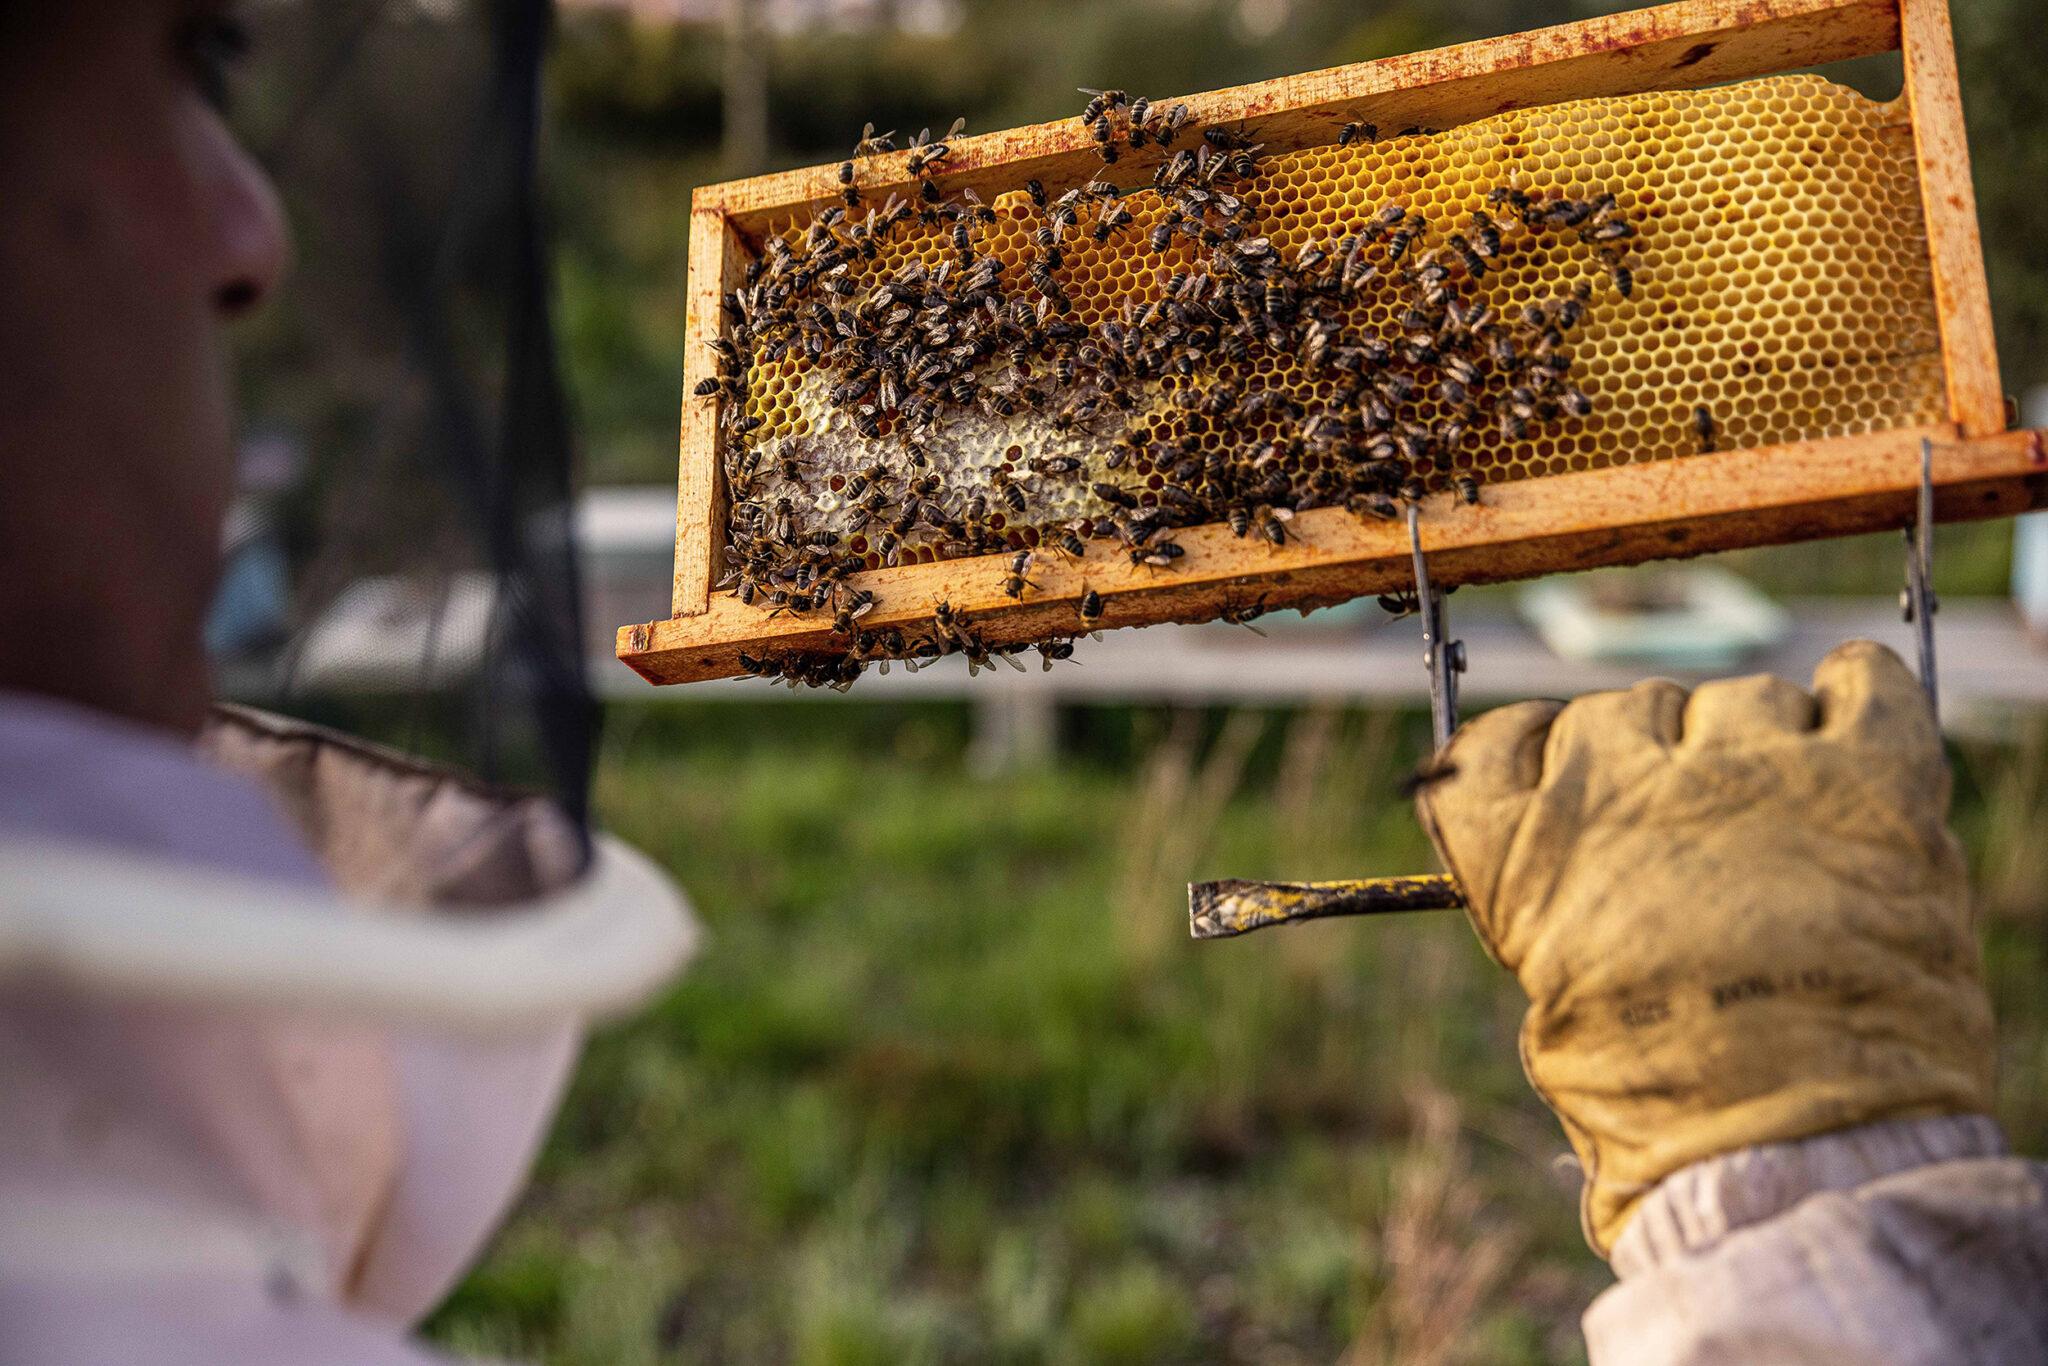 He tended to his beehives on his regular visits to the apiary. What started as a chance encounter with a swarm near his home six years ago has...